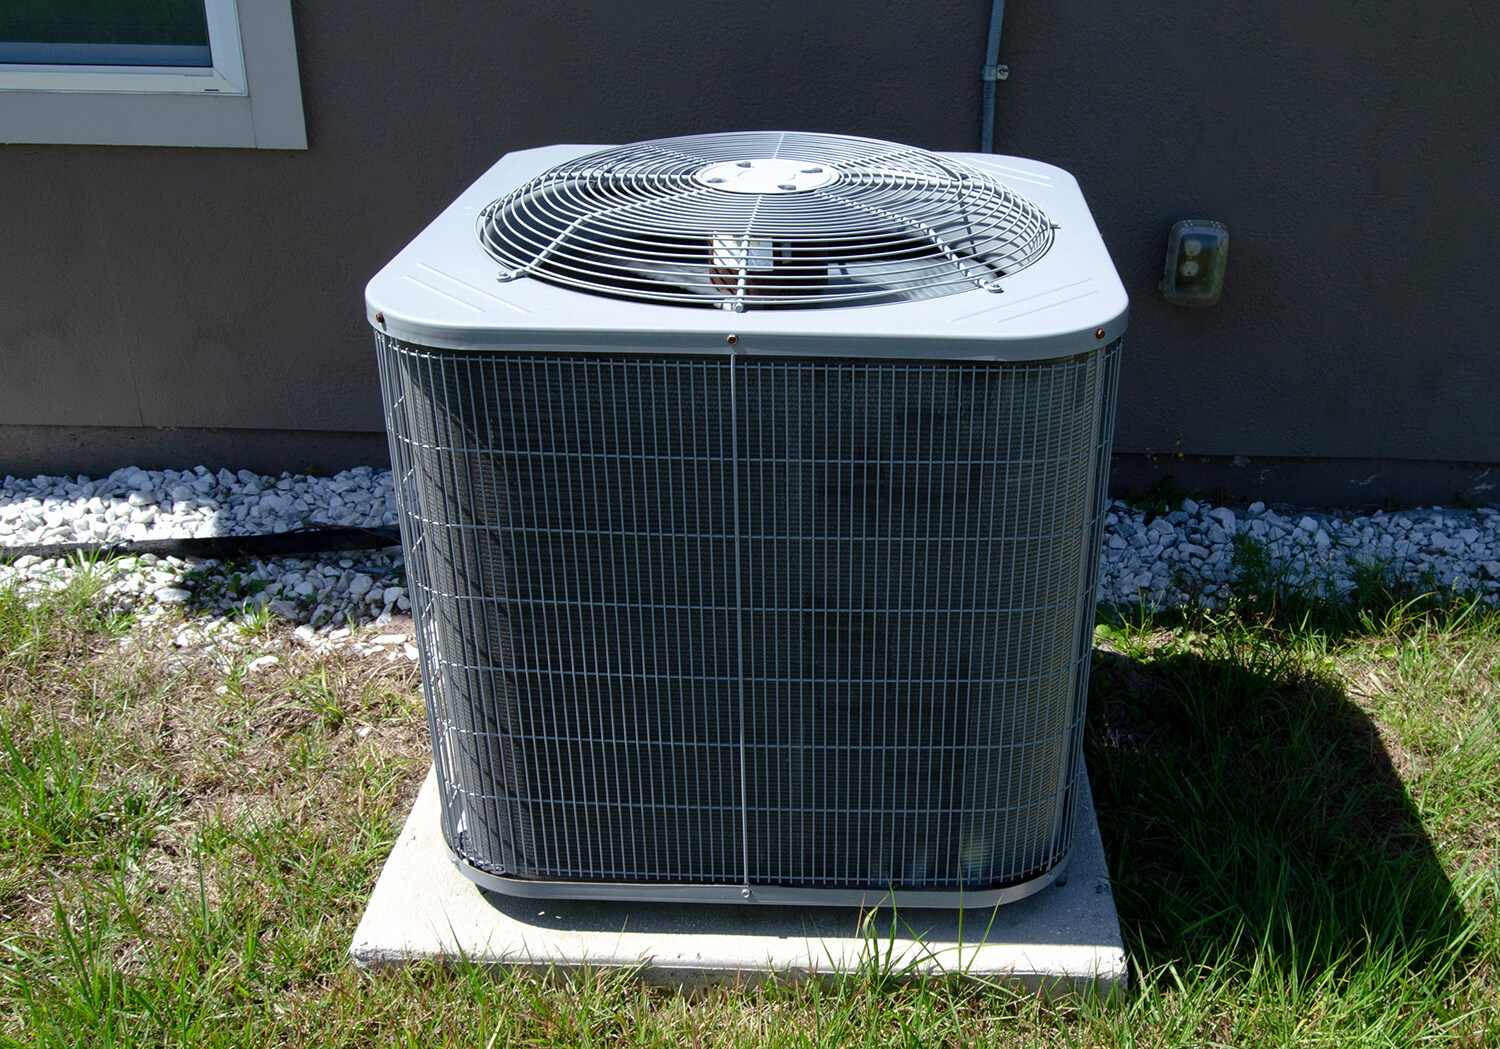 HVAC certification as a second task